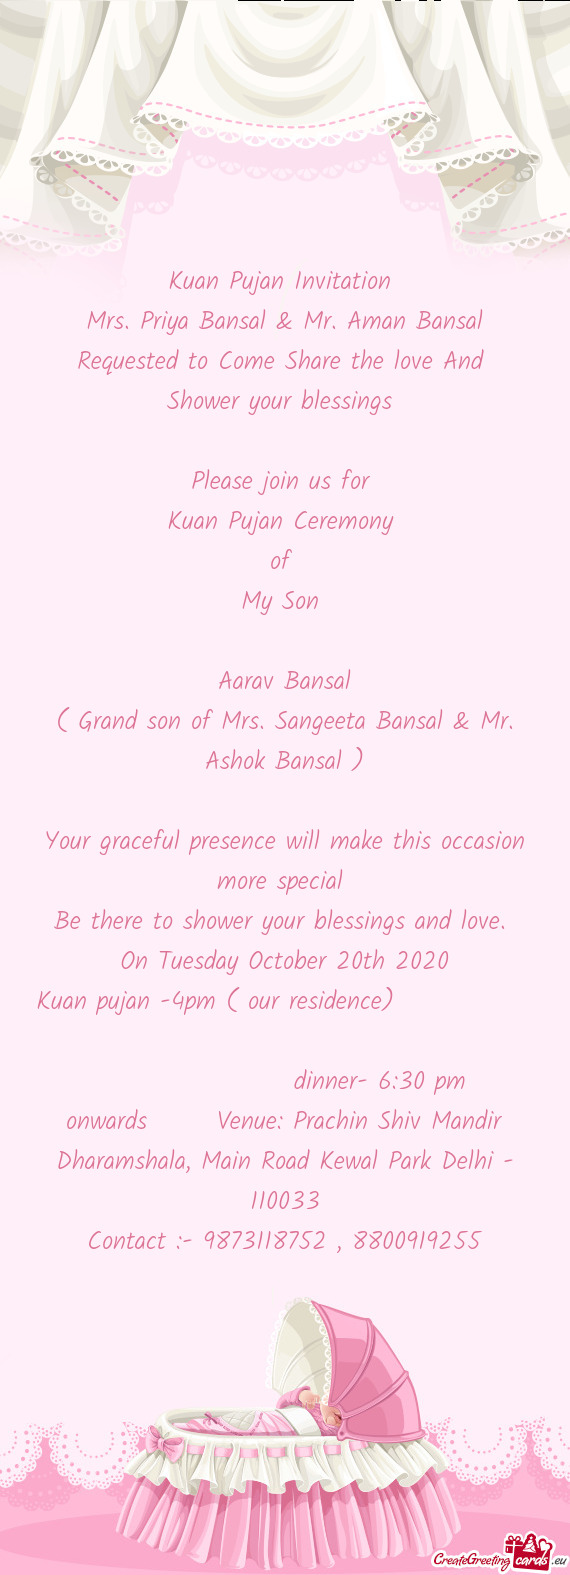 Kuan pujan -4pm ( our residence)          dinner- 6:30 pm onwards